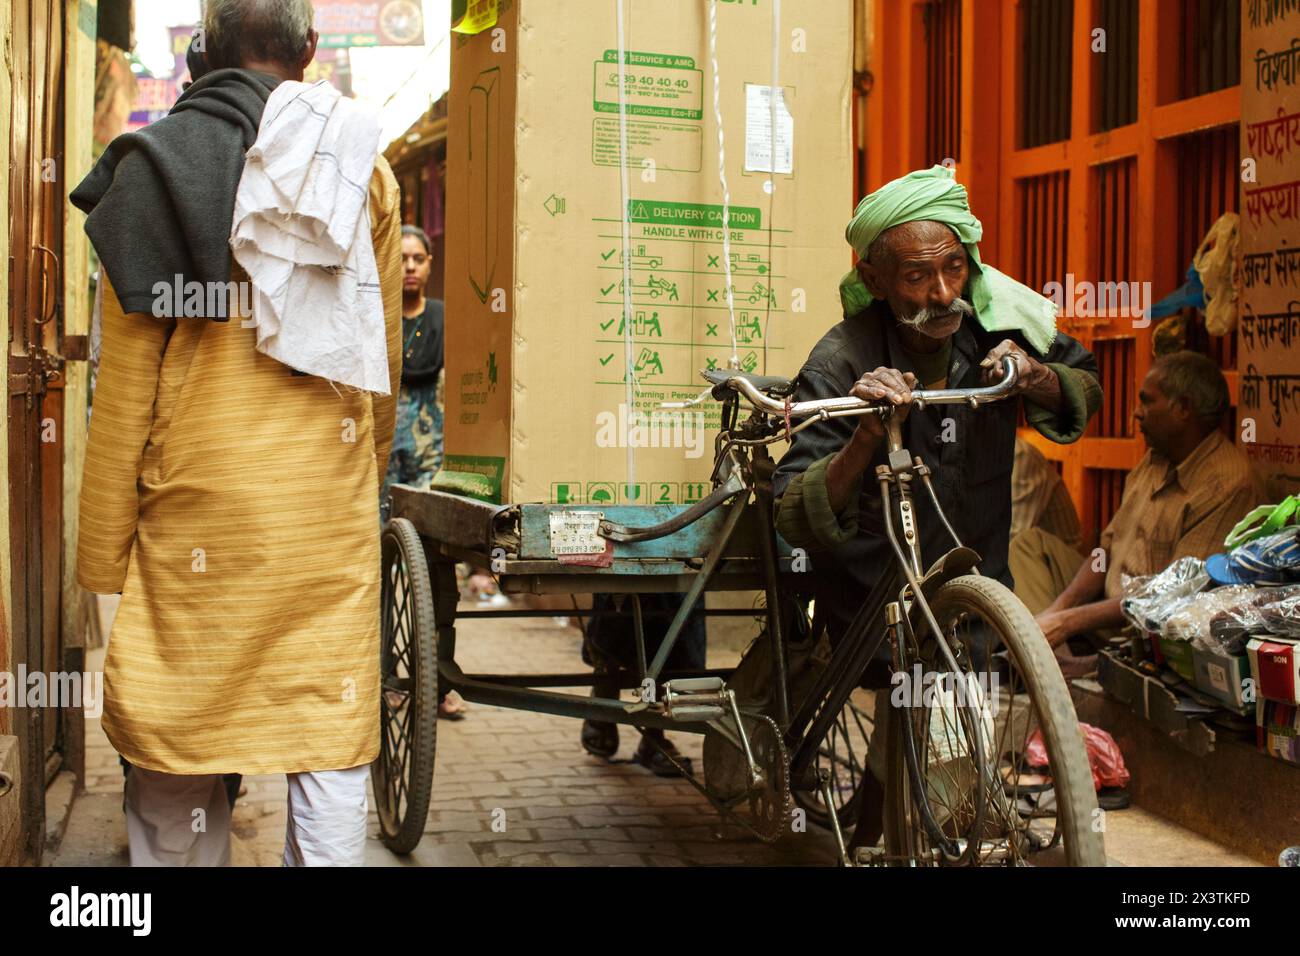 Elderly man pushing a cycle goods carrier loaded with a refrigerator through an alleyway in Varanasi, India. Stock Photo